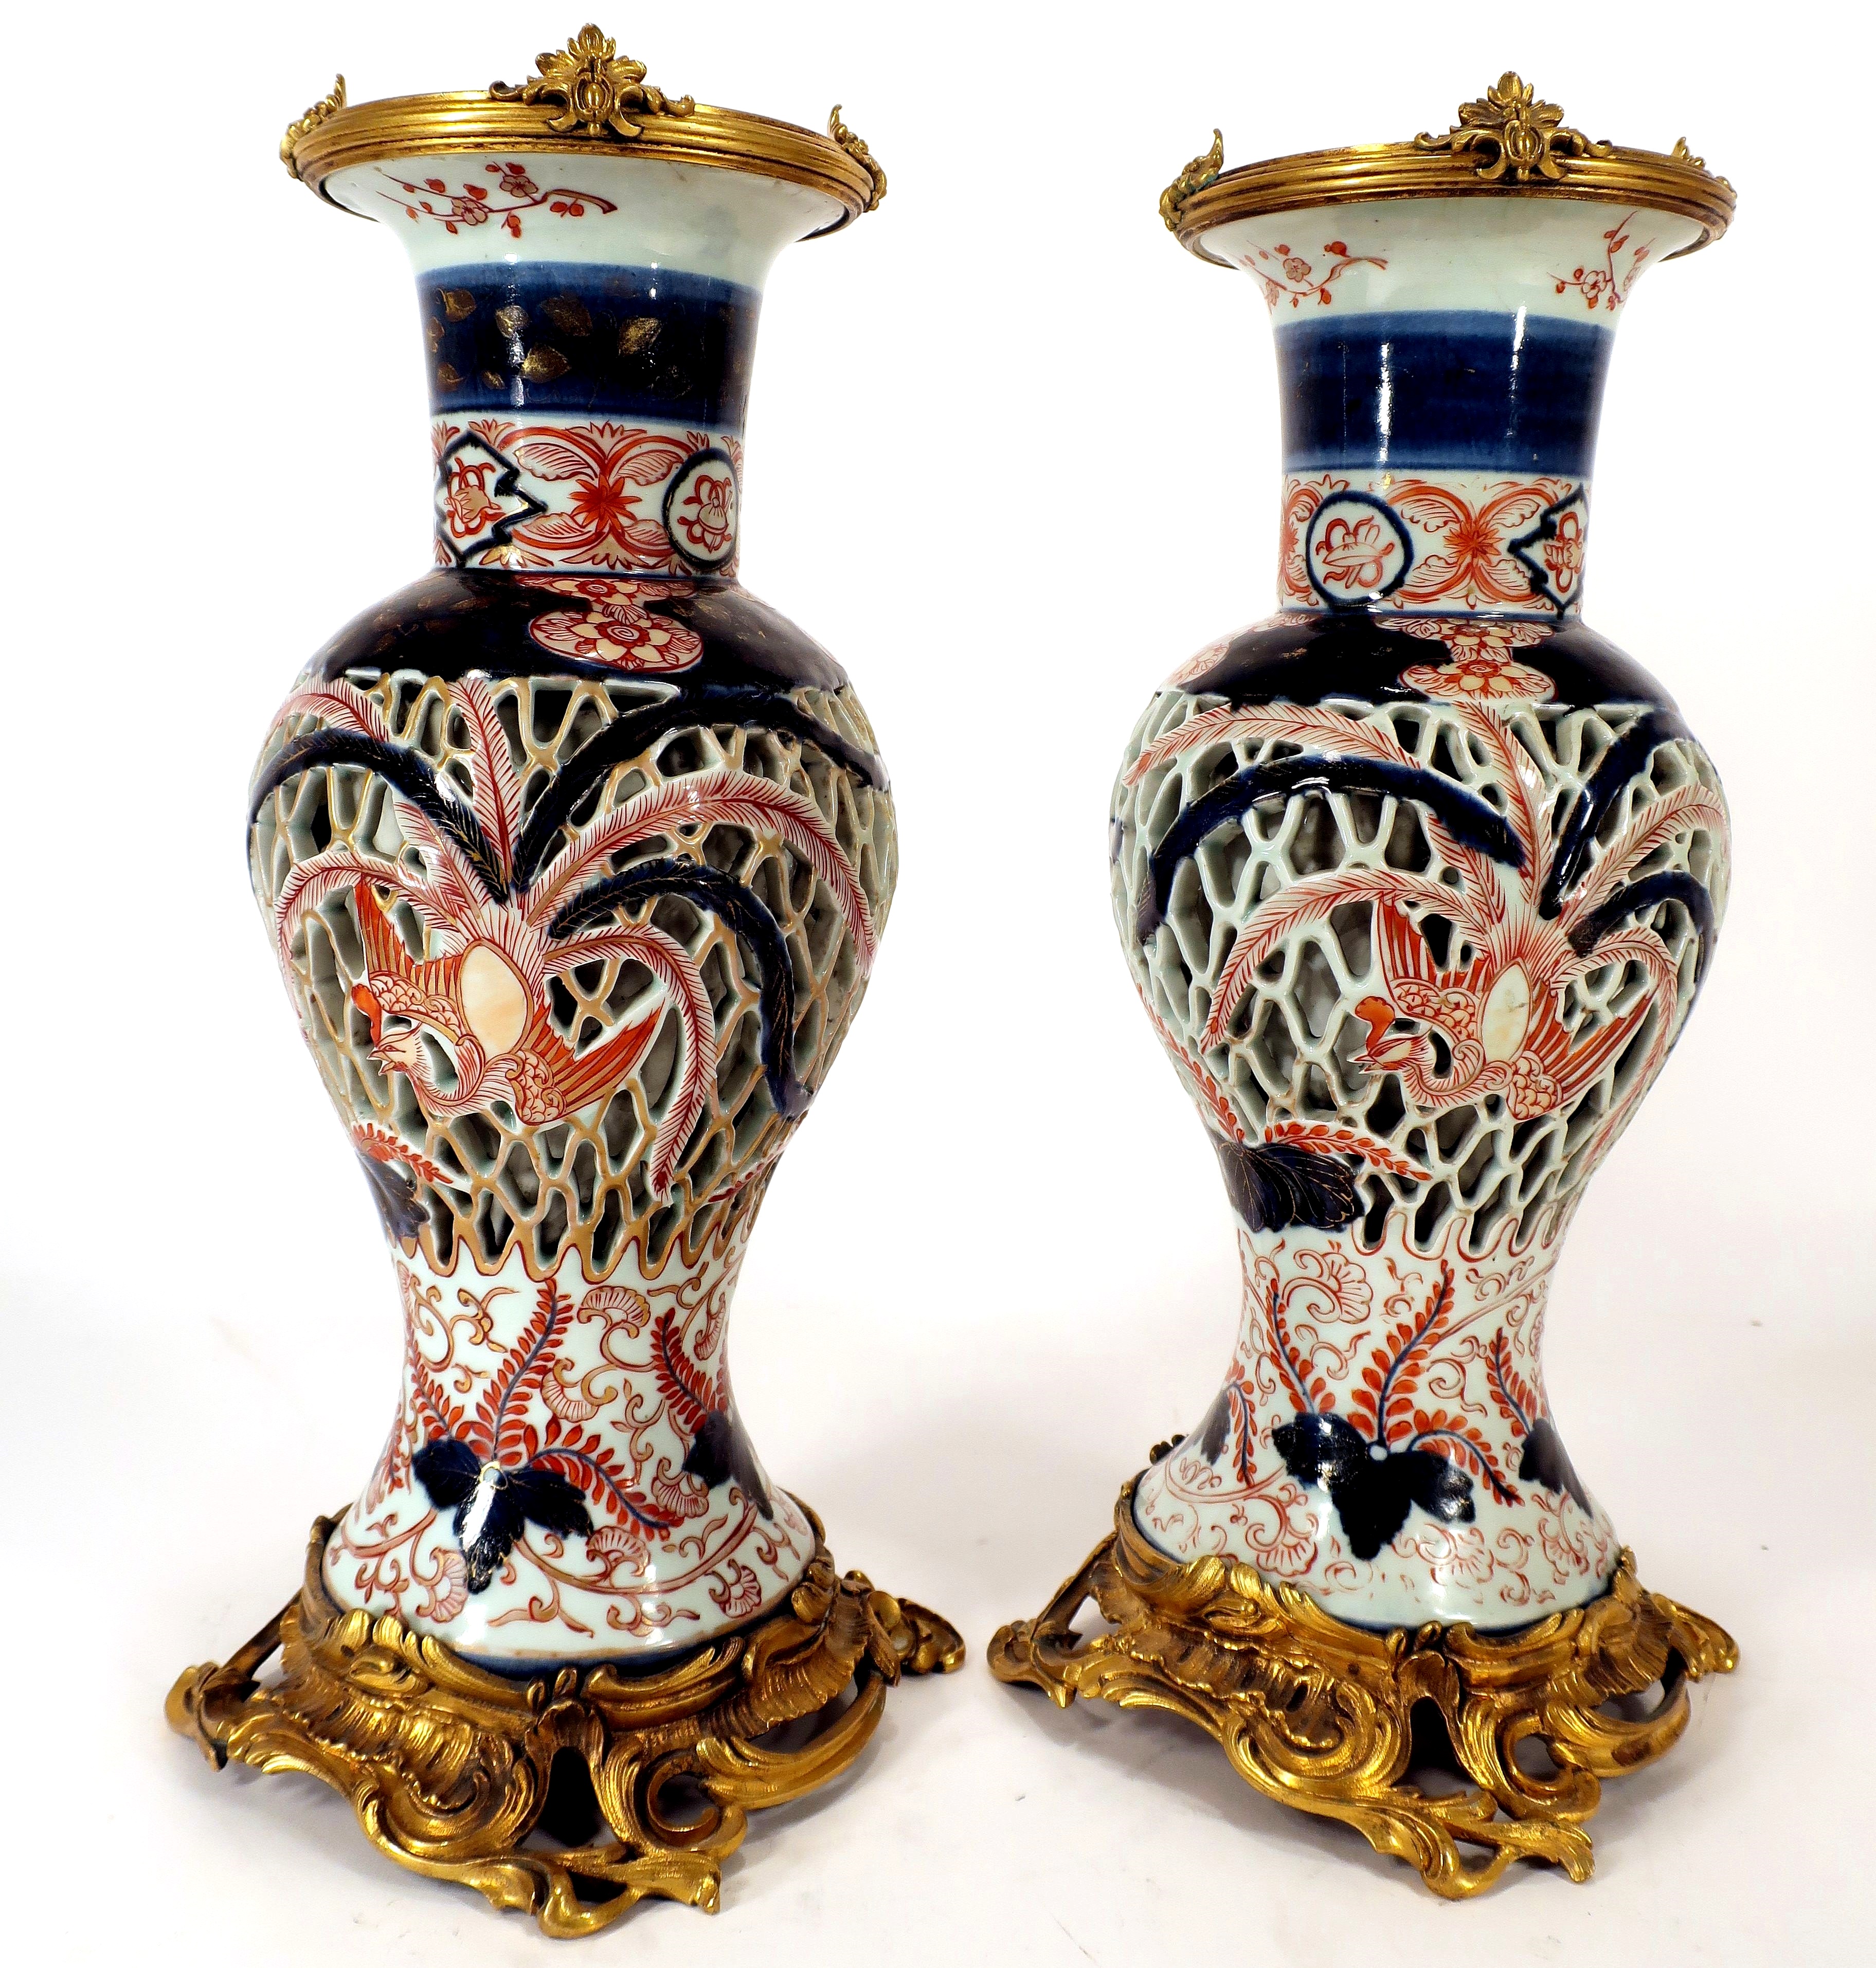 Pair Of Gilt Bronze Mounted Imari Vases. Sold For $6,250